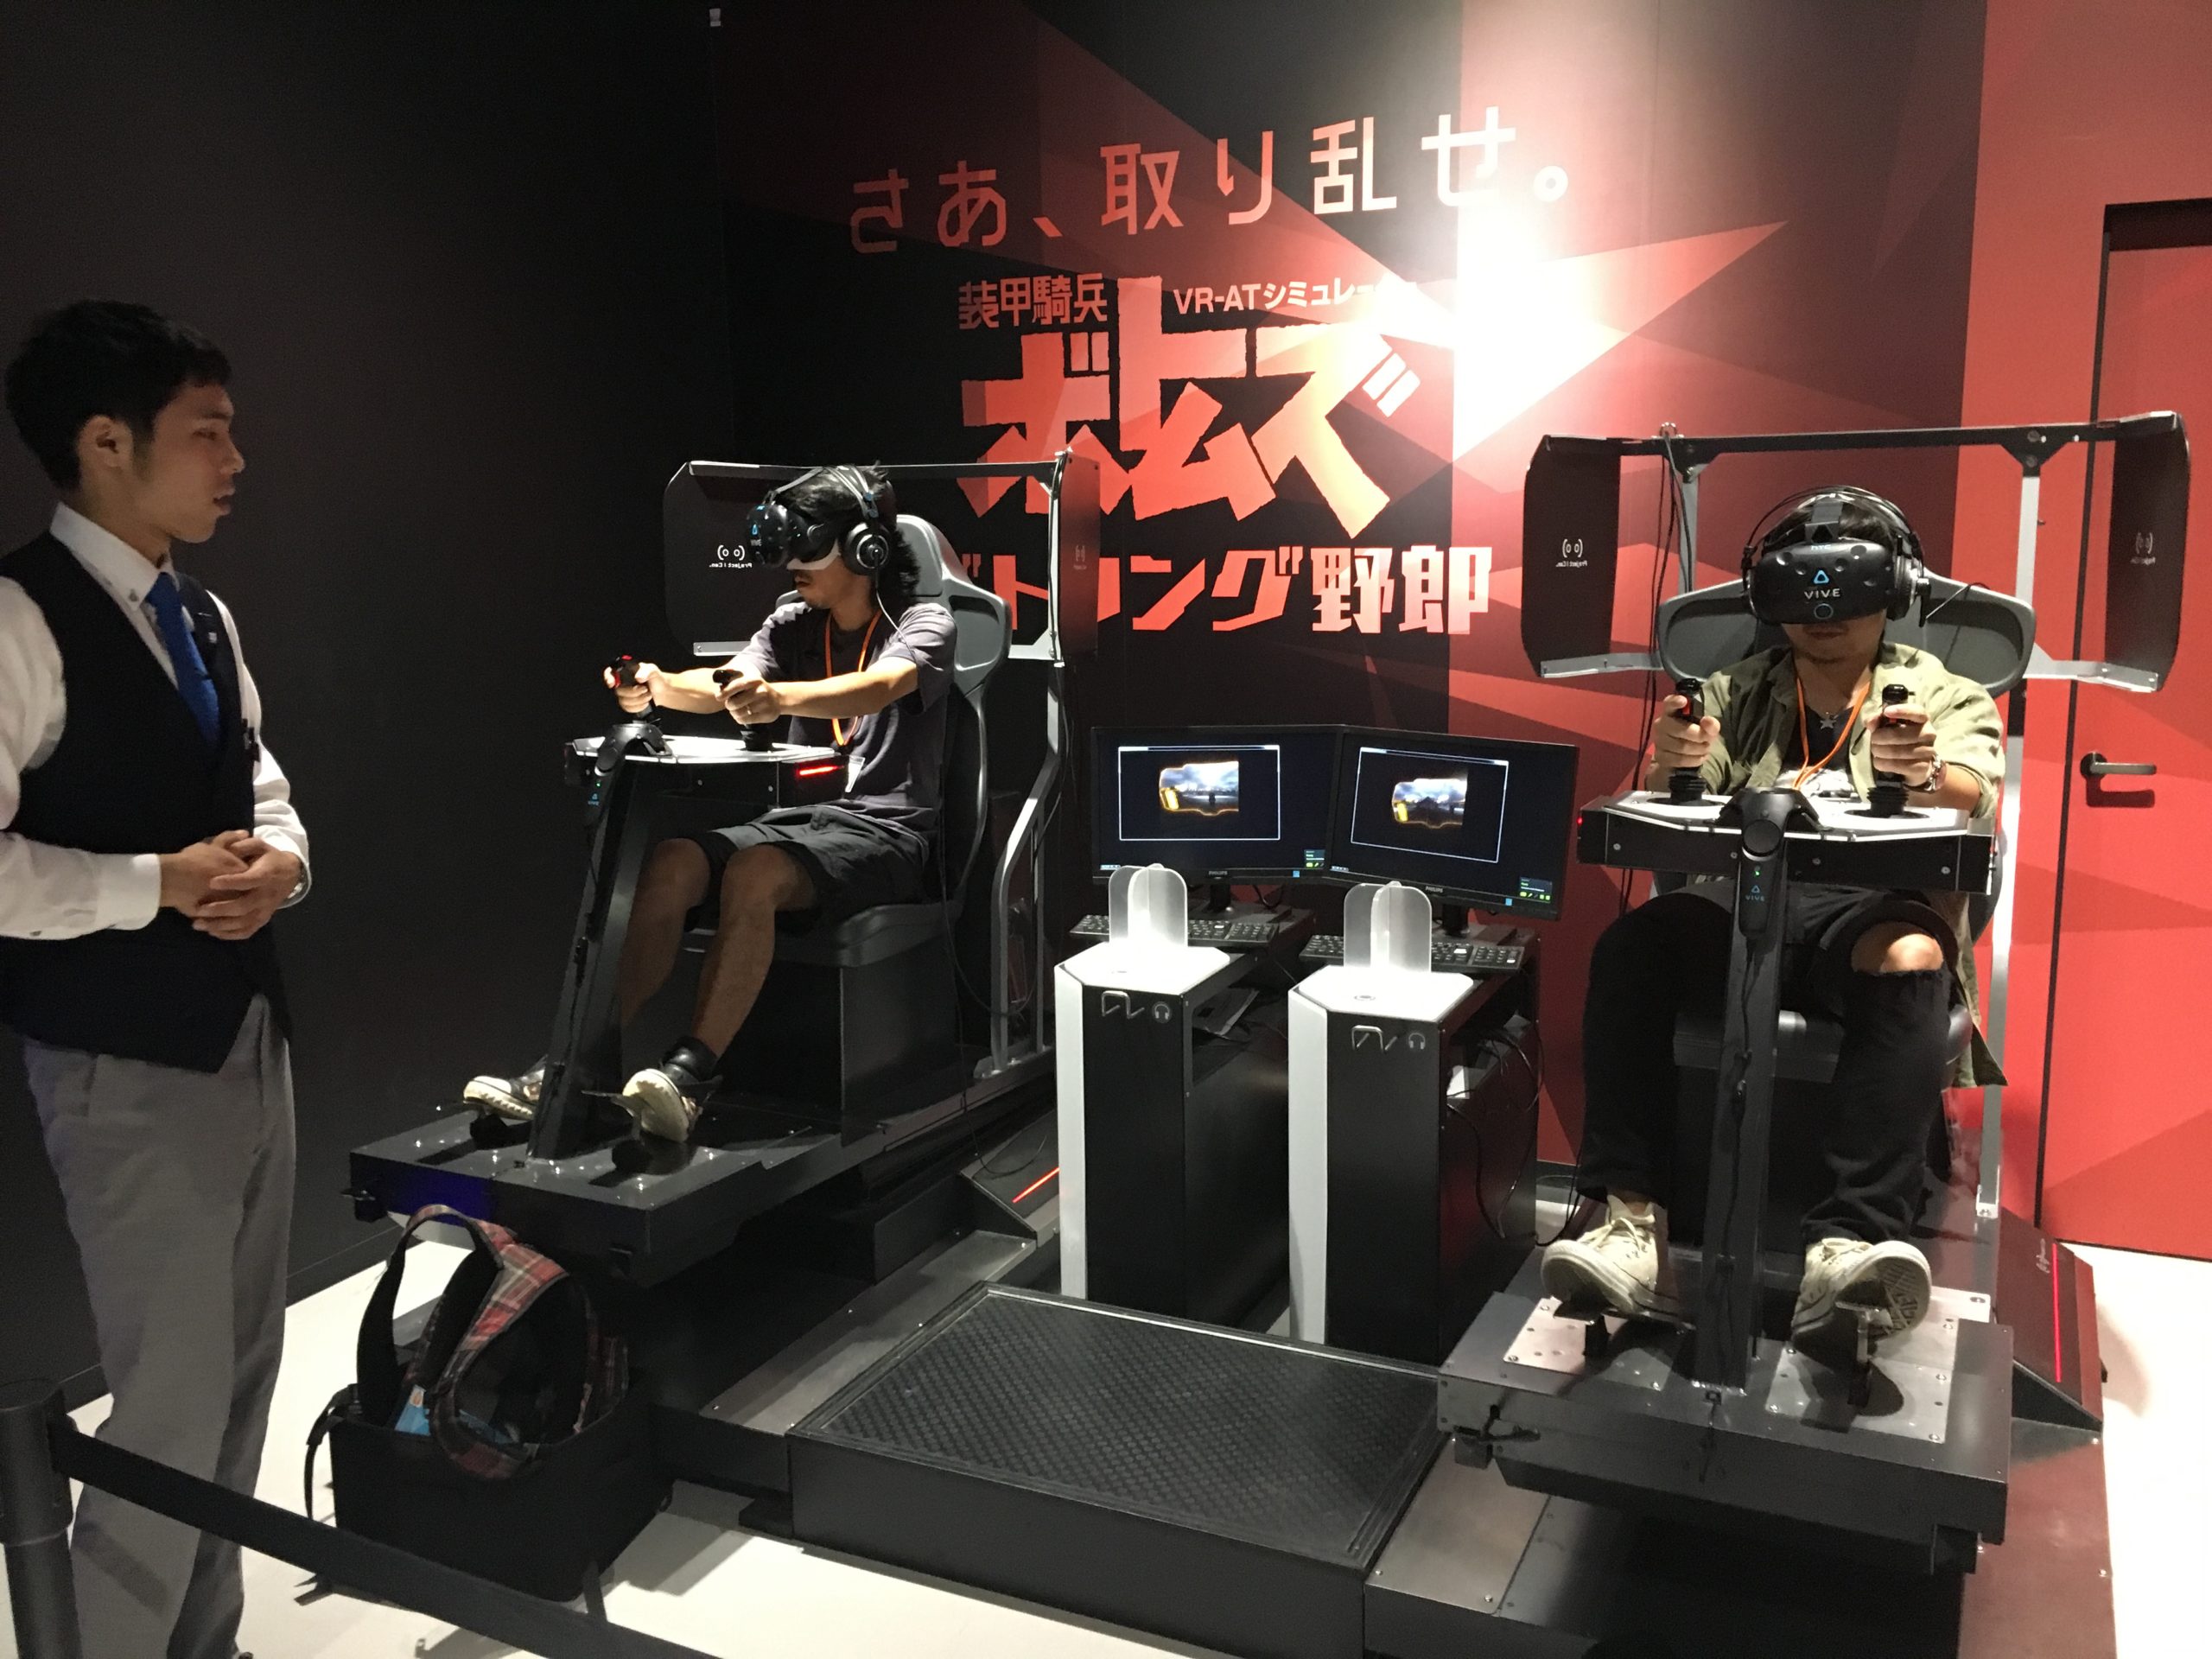 I Played Mario Kart VR And It Was Pretty OK